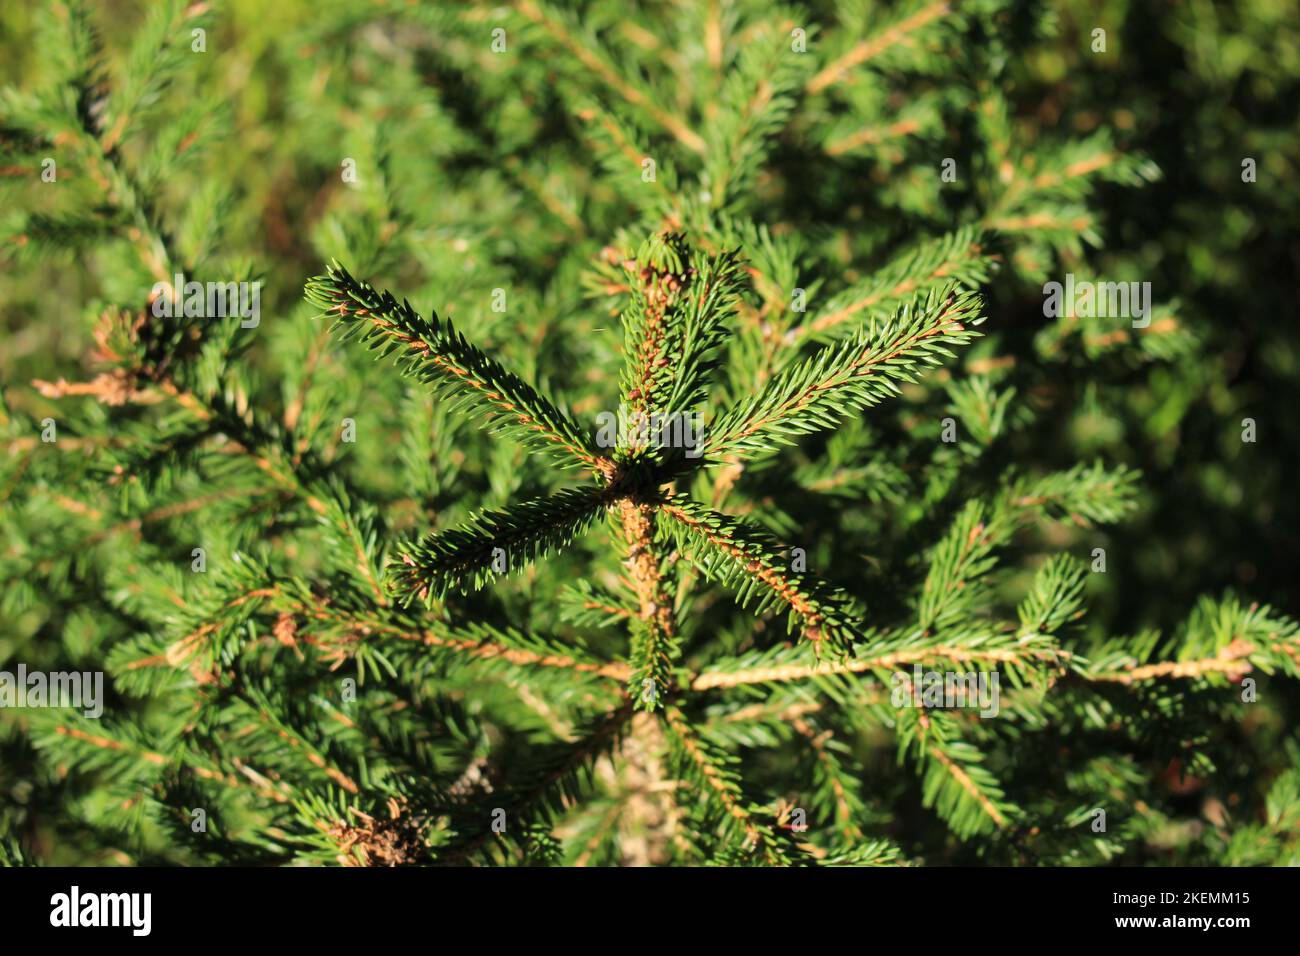 Young spruce tree top in the sun with other trees crowded in the background. All green nature conifer forest background. Concept growing young trees Stock Photo